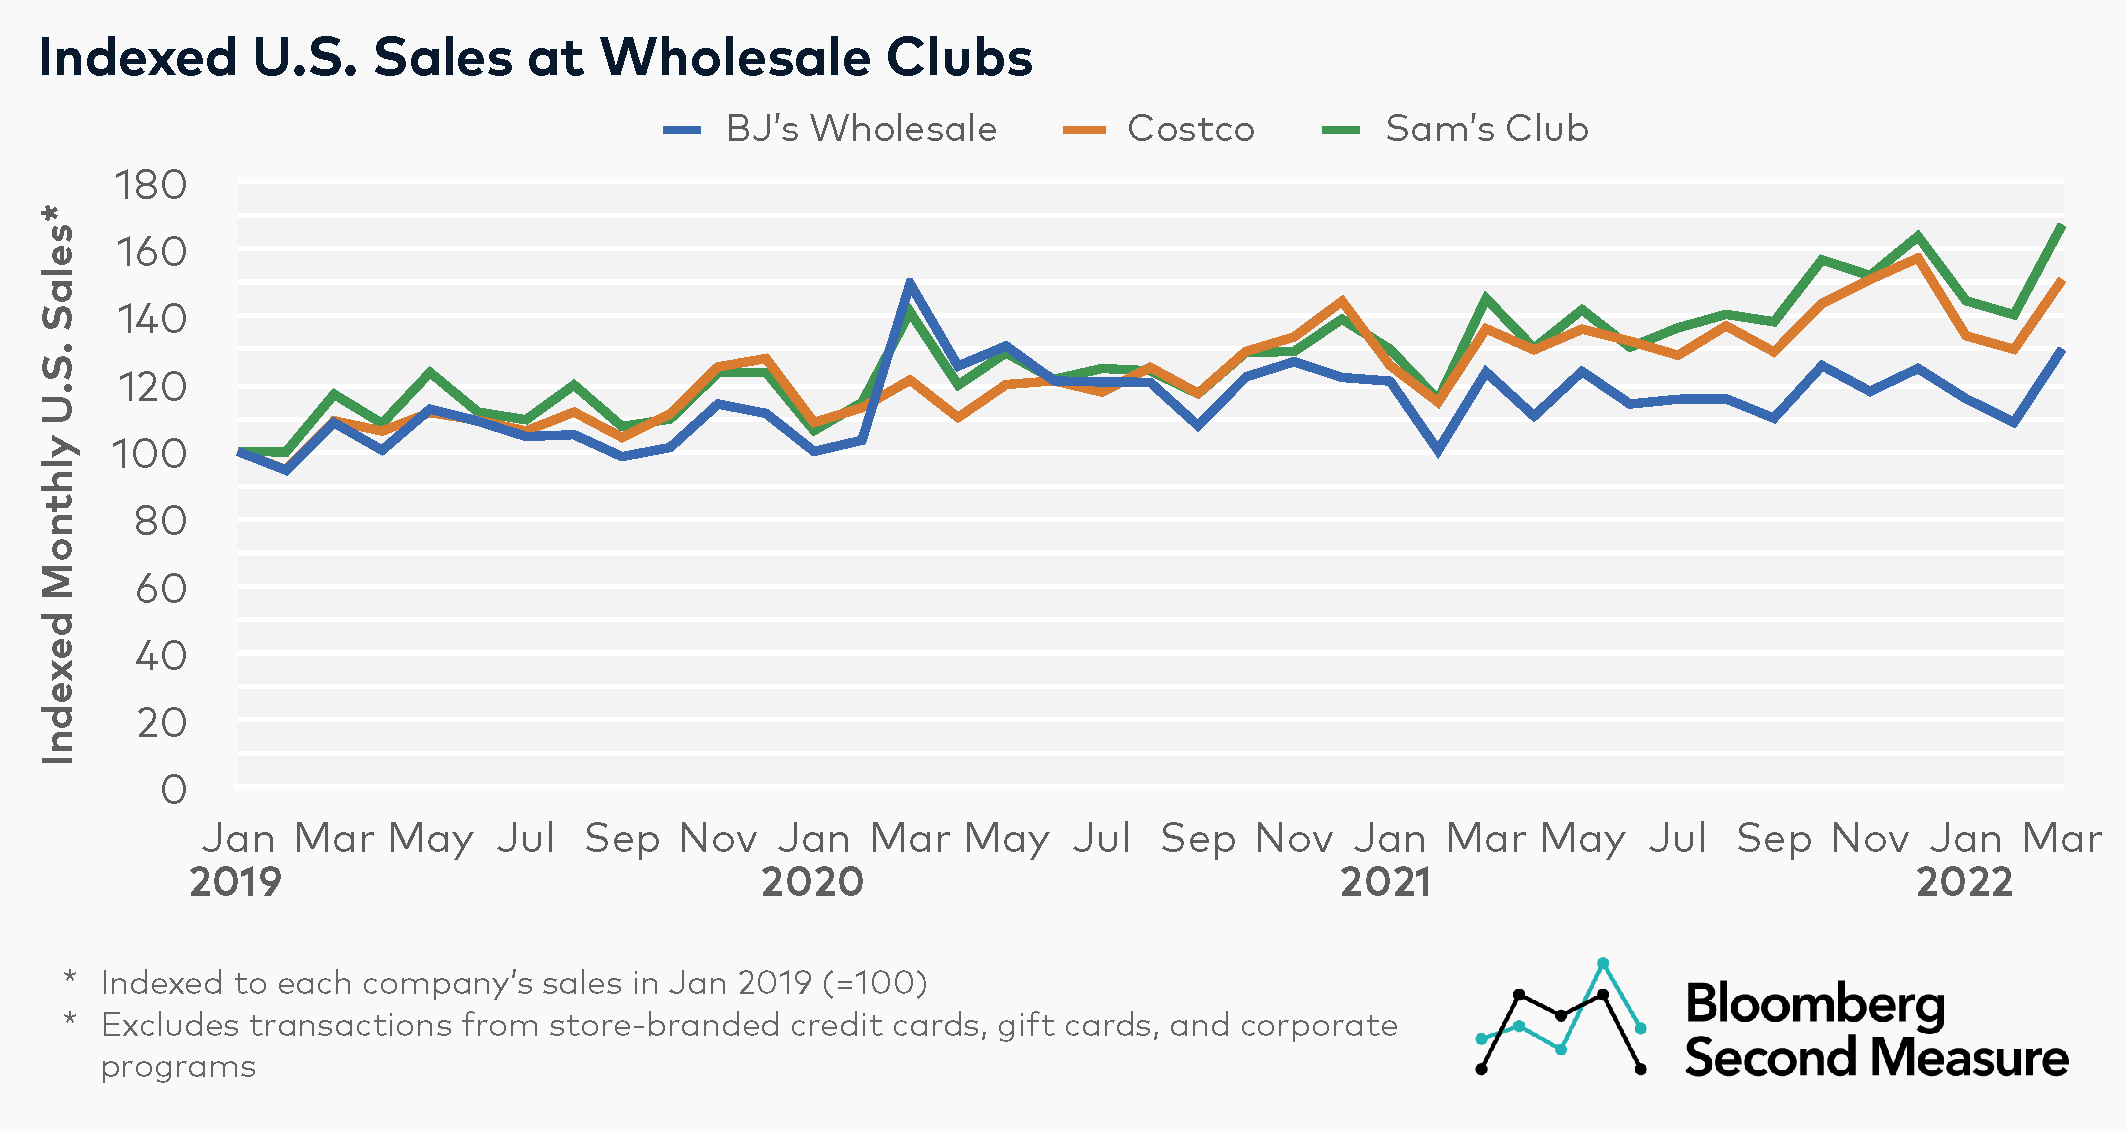 Two years into the pandemic, consumer spending still growing at Costco and Sam's  Club - Bloomberg Second Measure